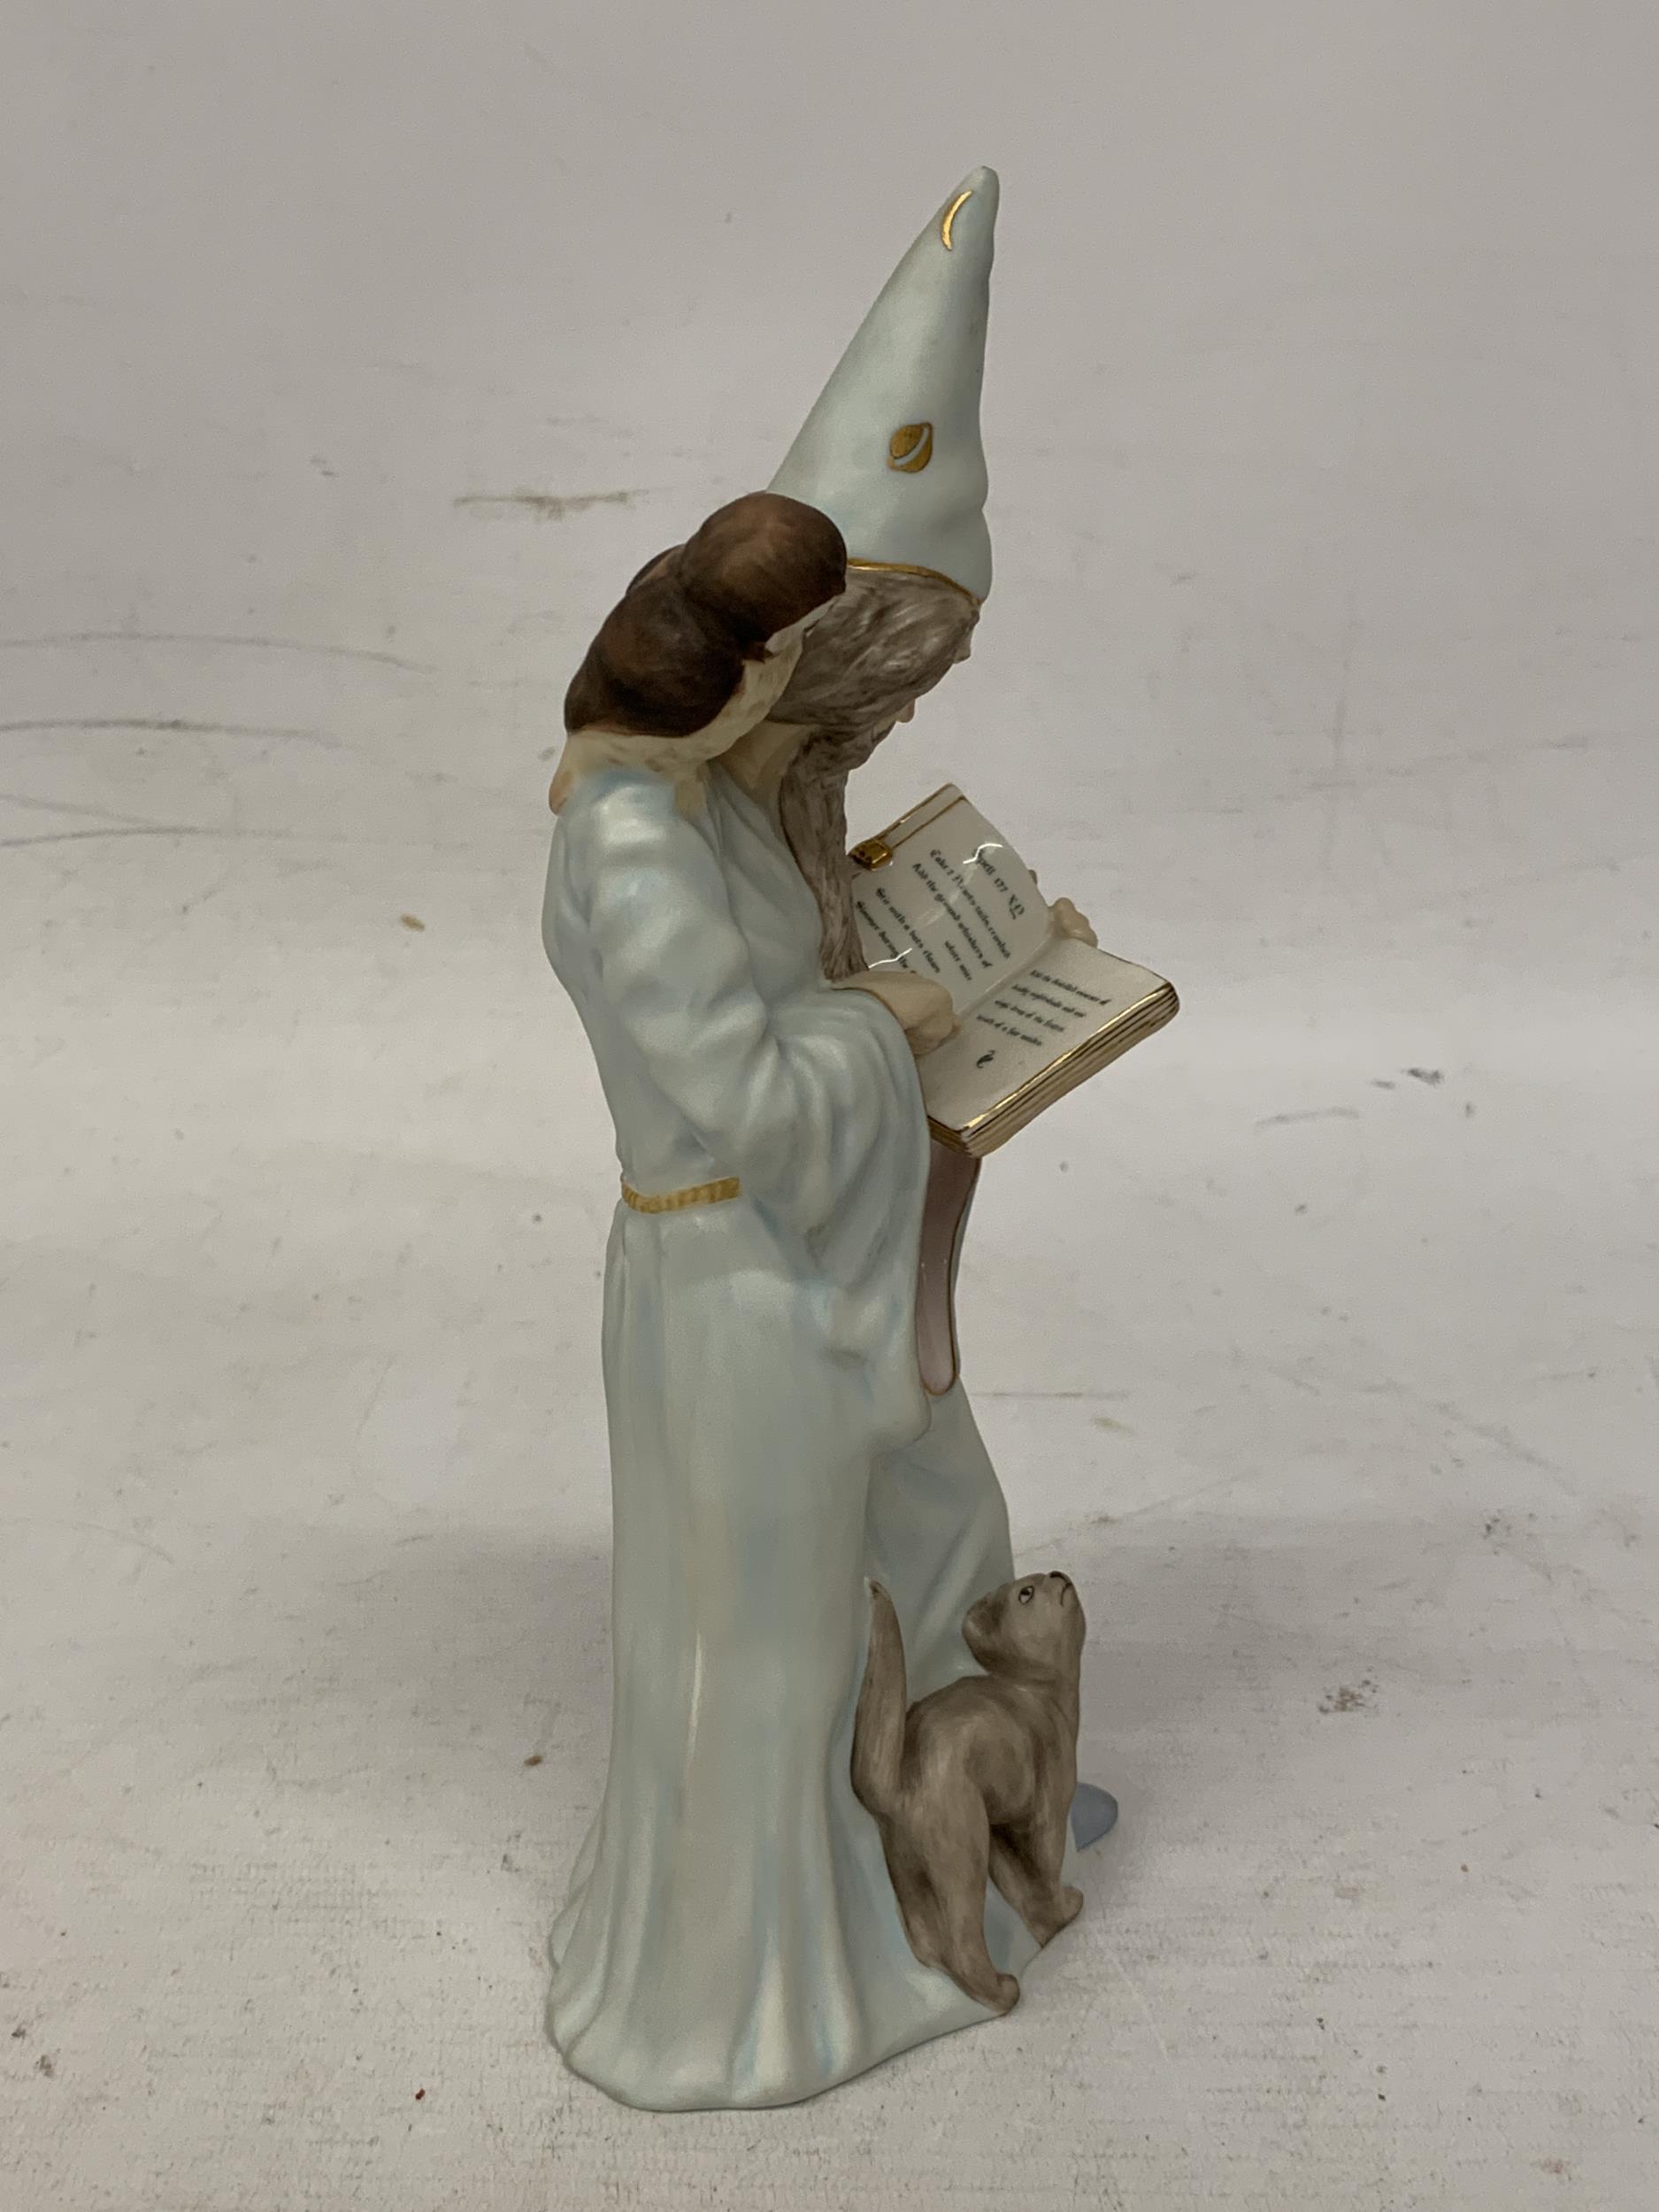 A ROYAL DOULTON FIGURE "THE WIZARD" HN 4069 LIMITED EDITION SIGNED IN GOLD - Image 2 of 5